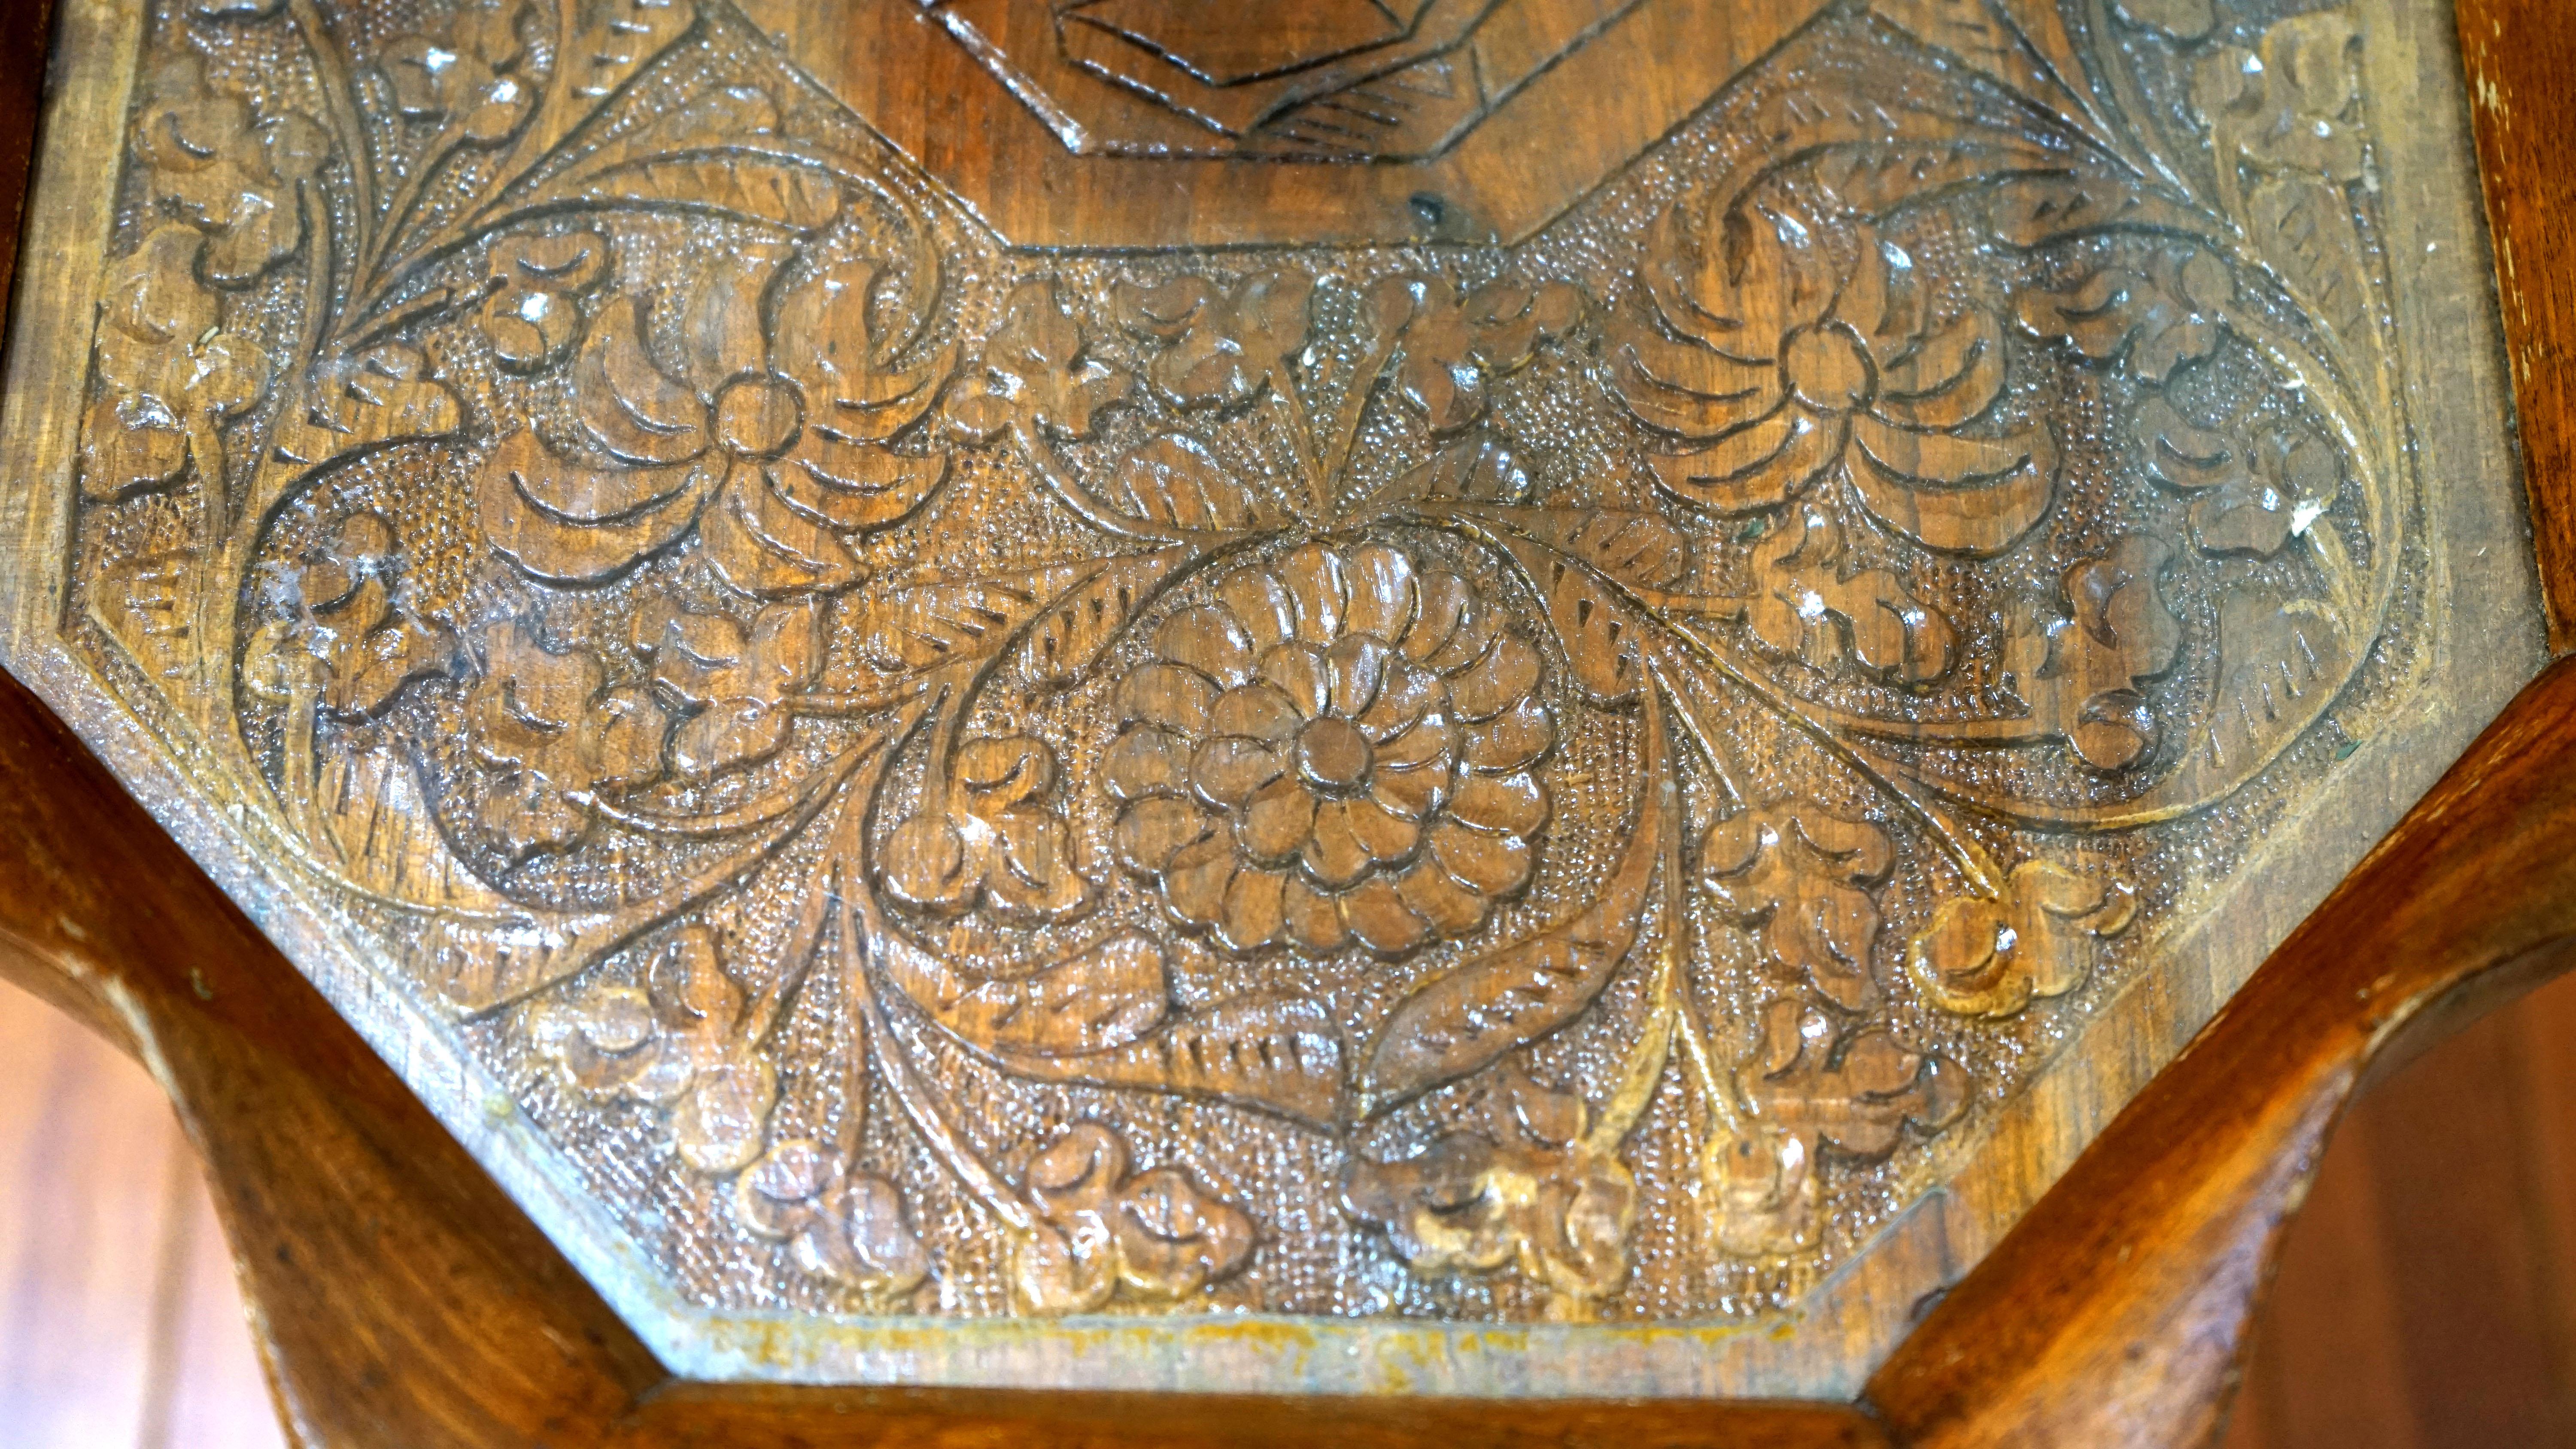 The absolute attraction of this table is the intricate carving on the top, which includes a centerpiece portrait of a gentleman wearing a period hat, and his image is surrounded by hand-carved flowers. It is collectible and functional. It is